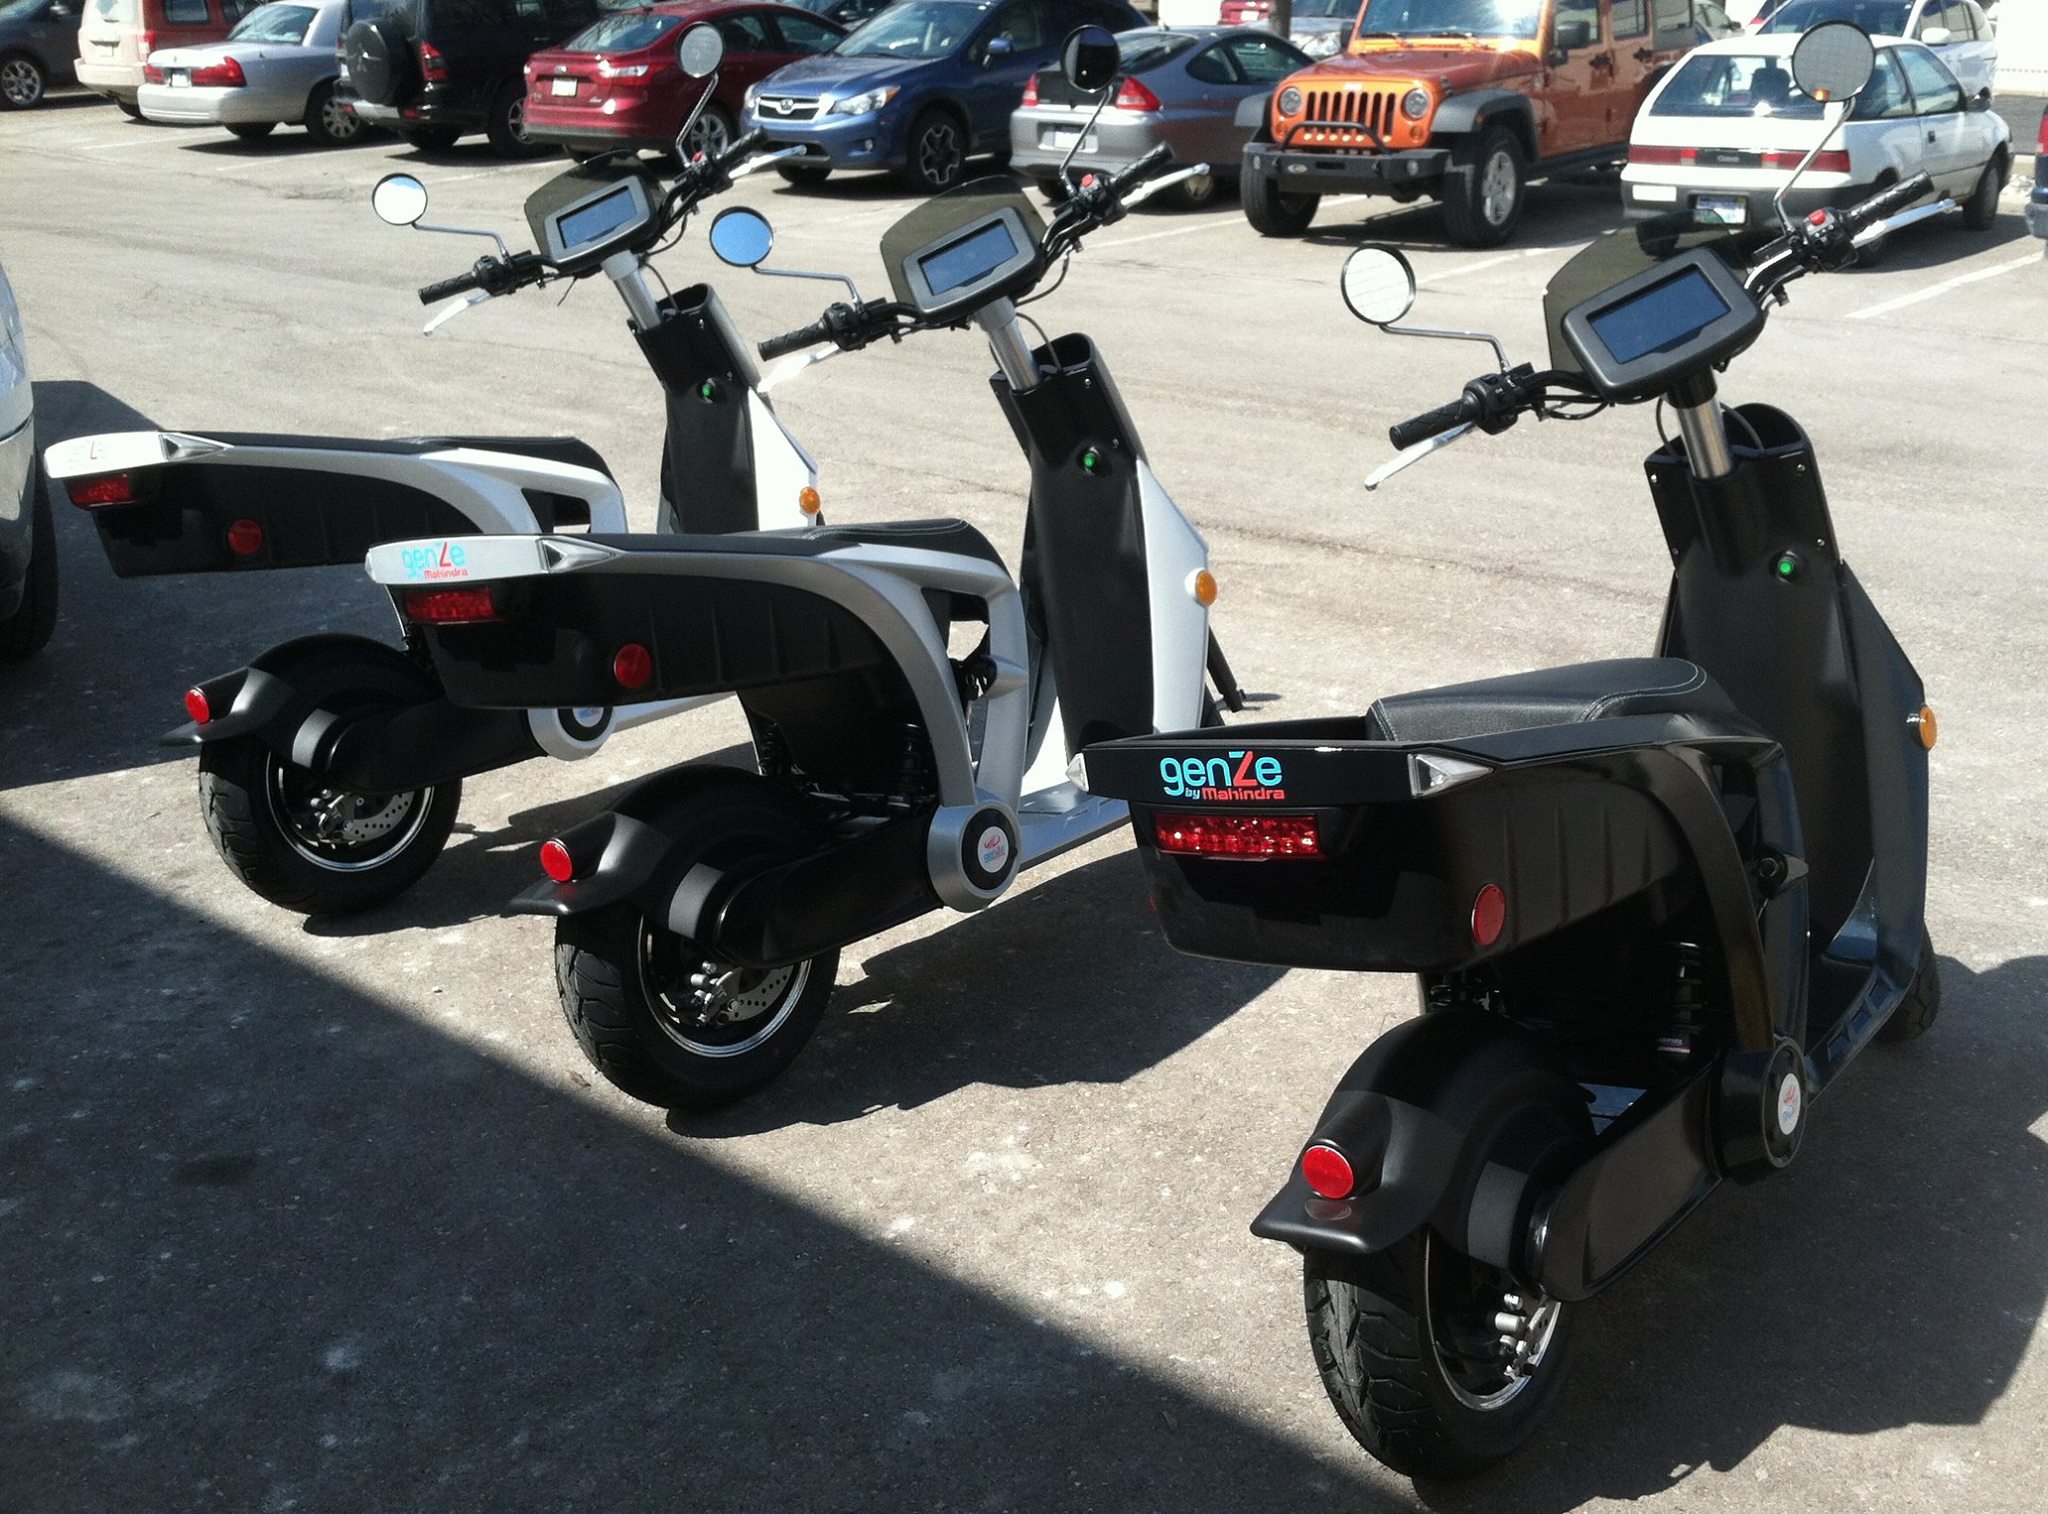 mahindra electric scooter